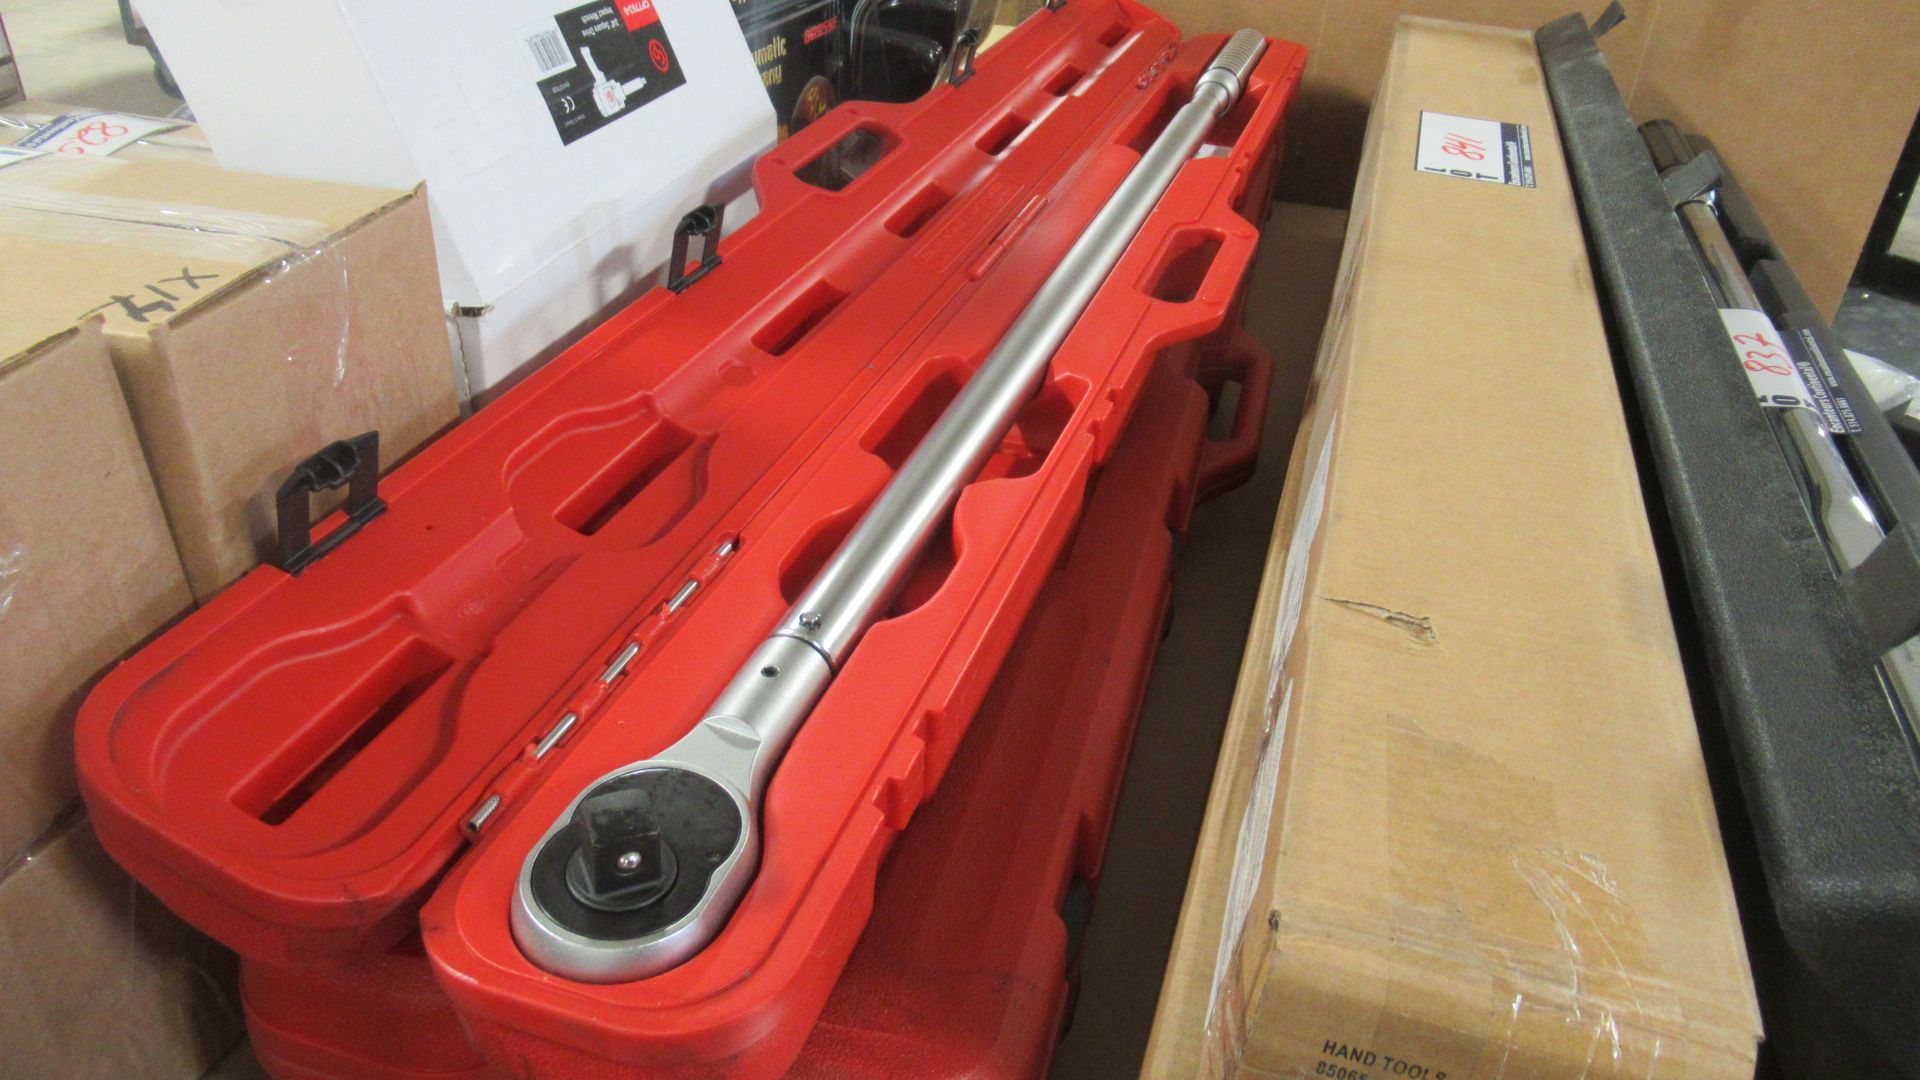 TORQUE WRENCH 3/4" 'STORM' 3T660